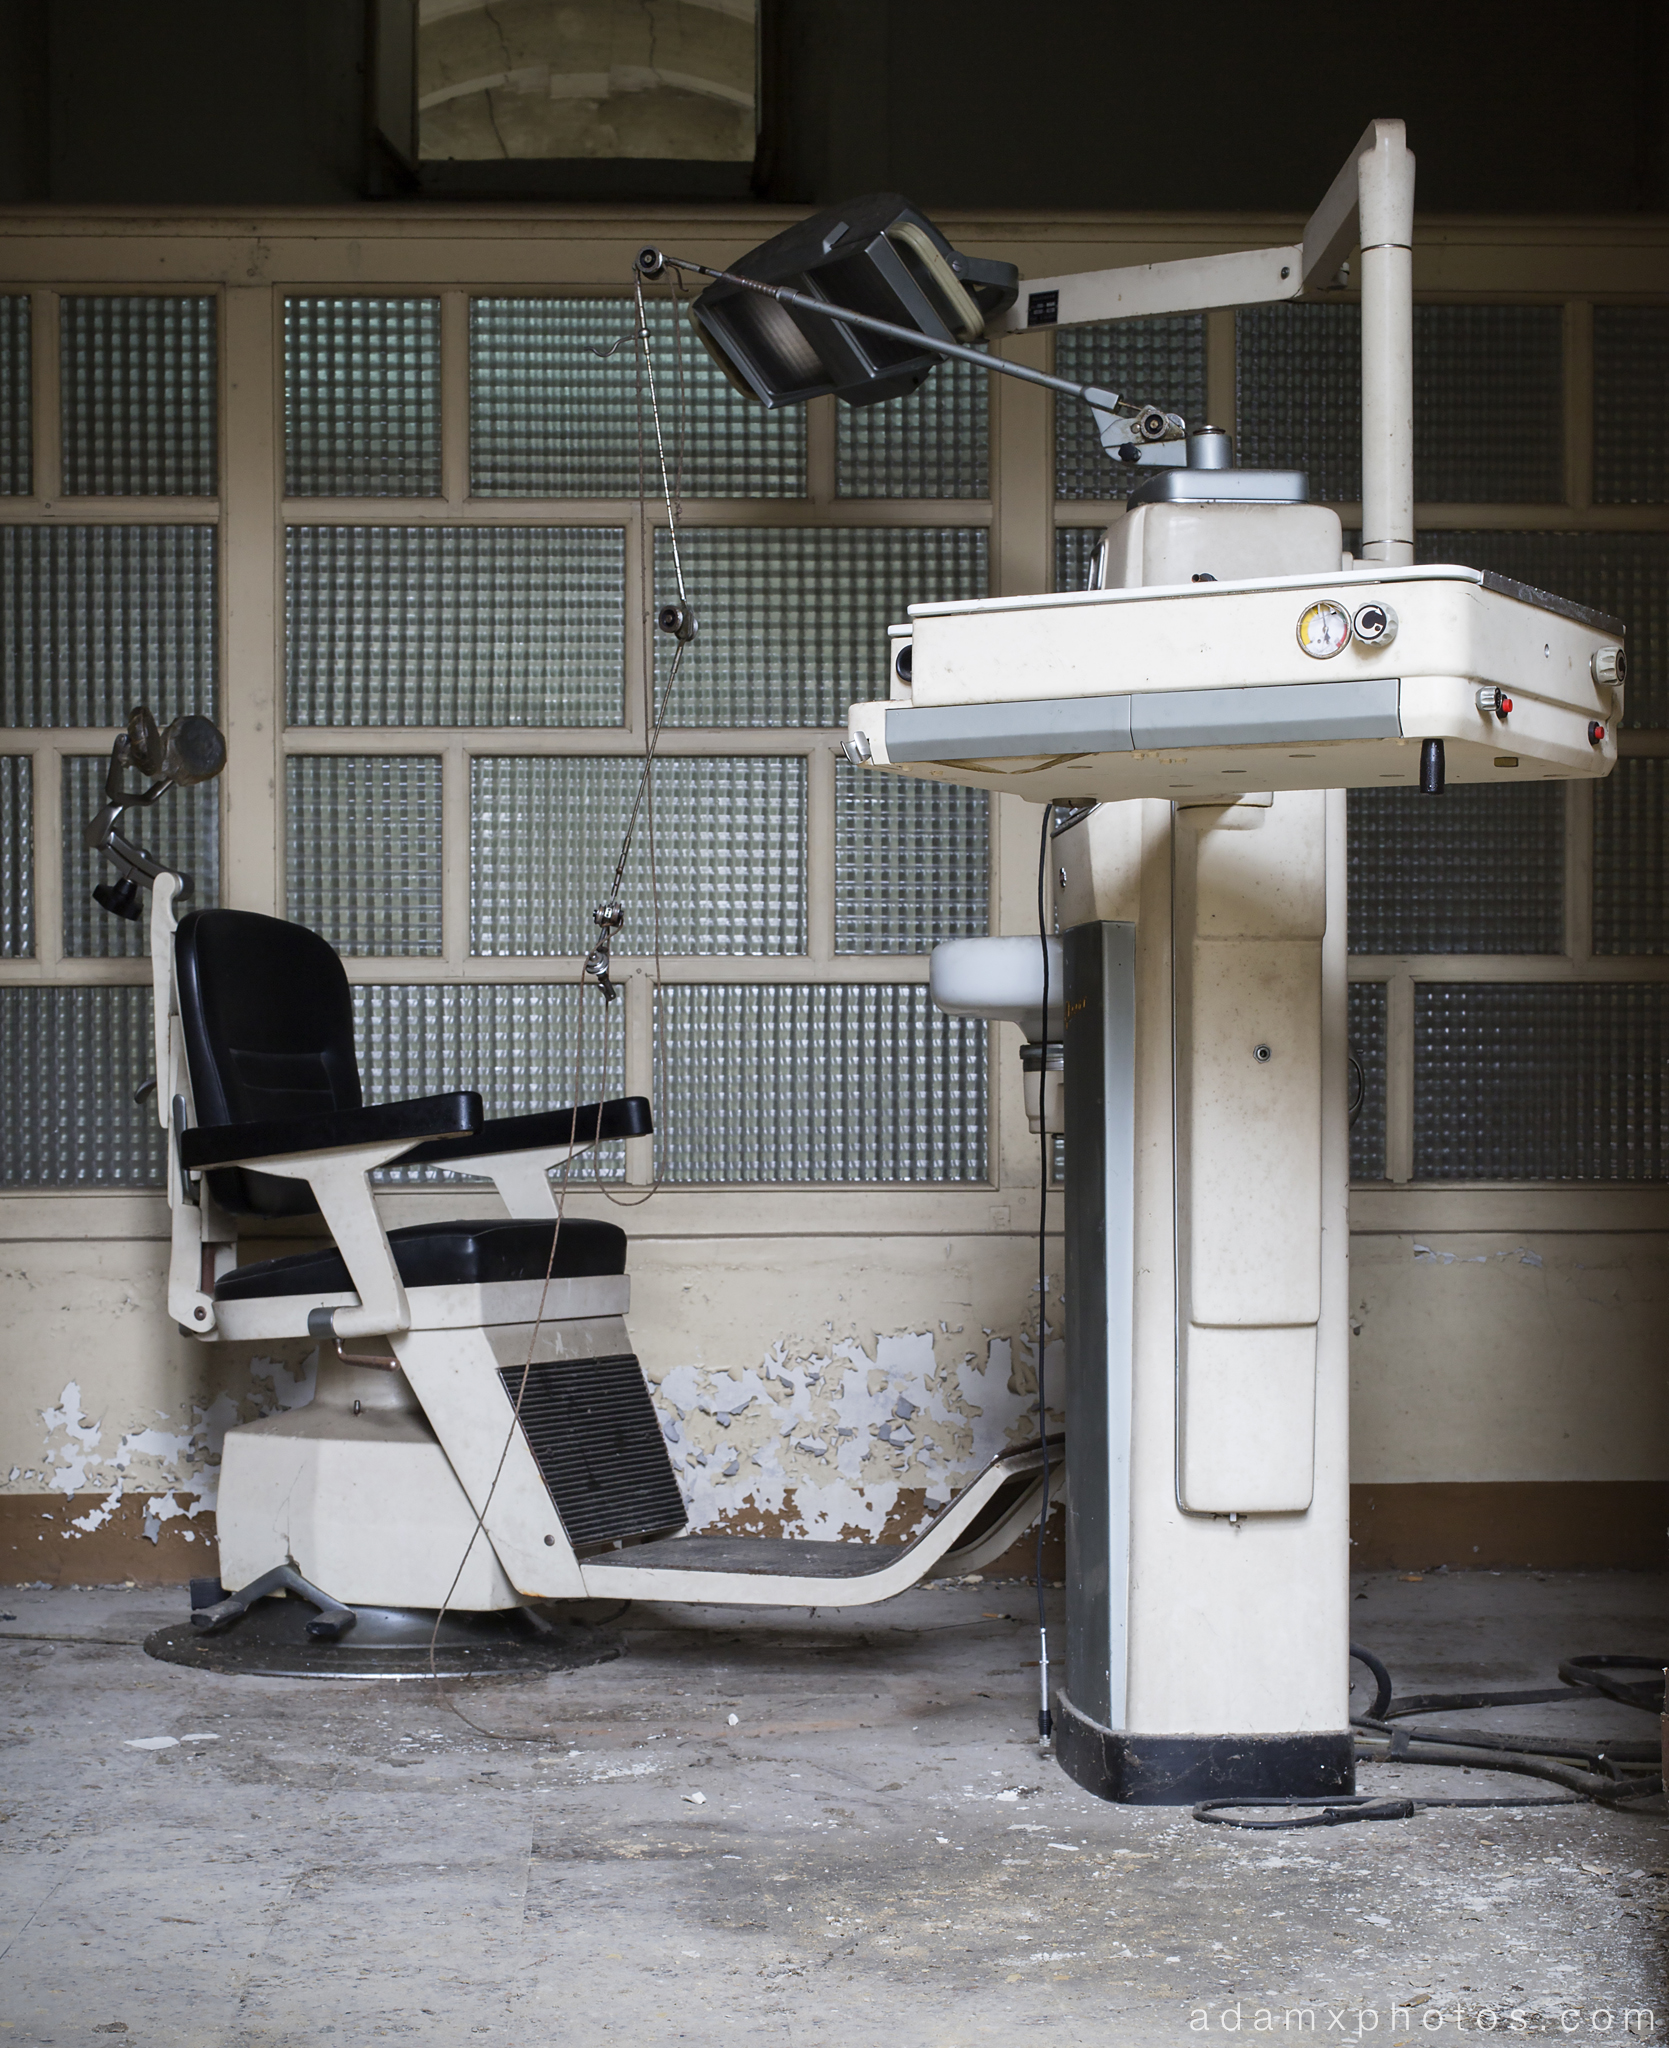 Manicomio di R Dr Rossetti Rosetti doctor Urbex Adam X Urban Exploration dentist dentist's chair medical photo photos report decay detail UE abandoned derelict unused empty disused decay decayed decaying grimy grime